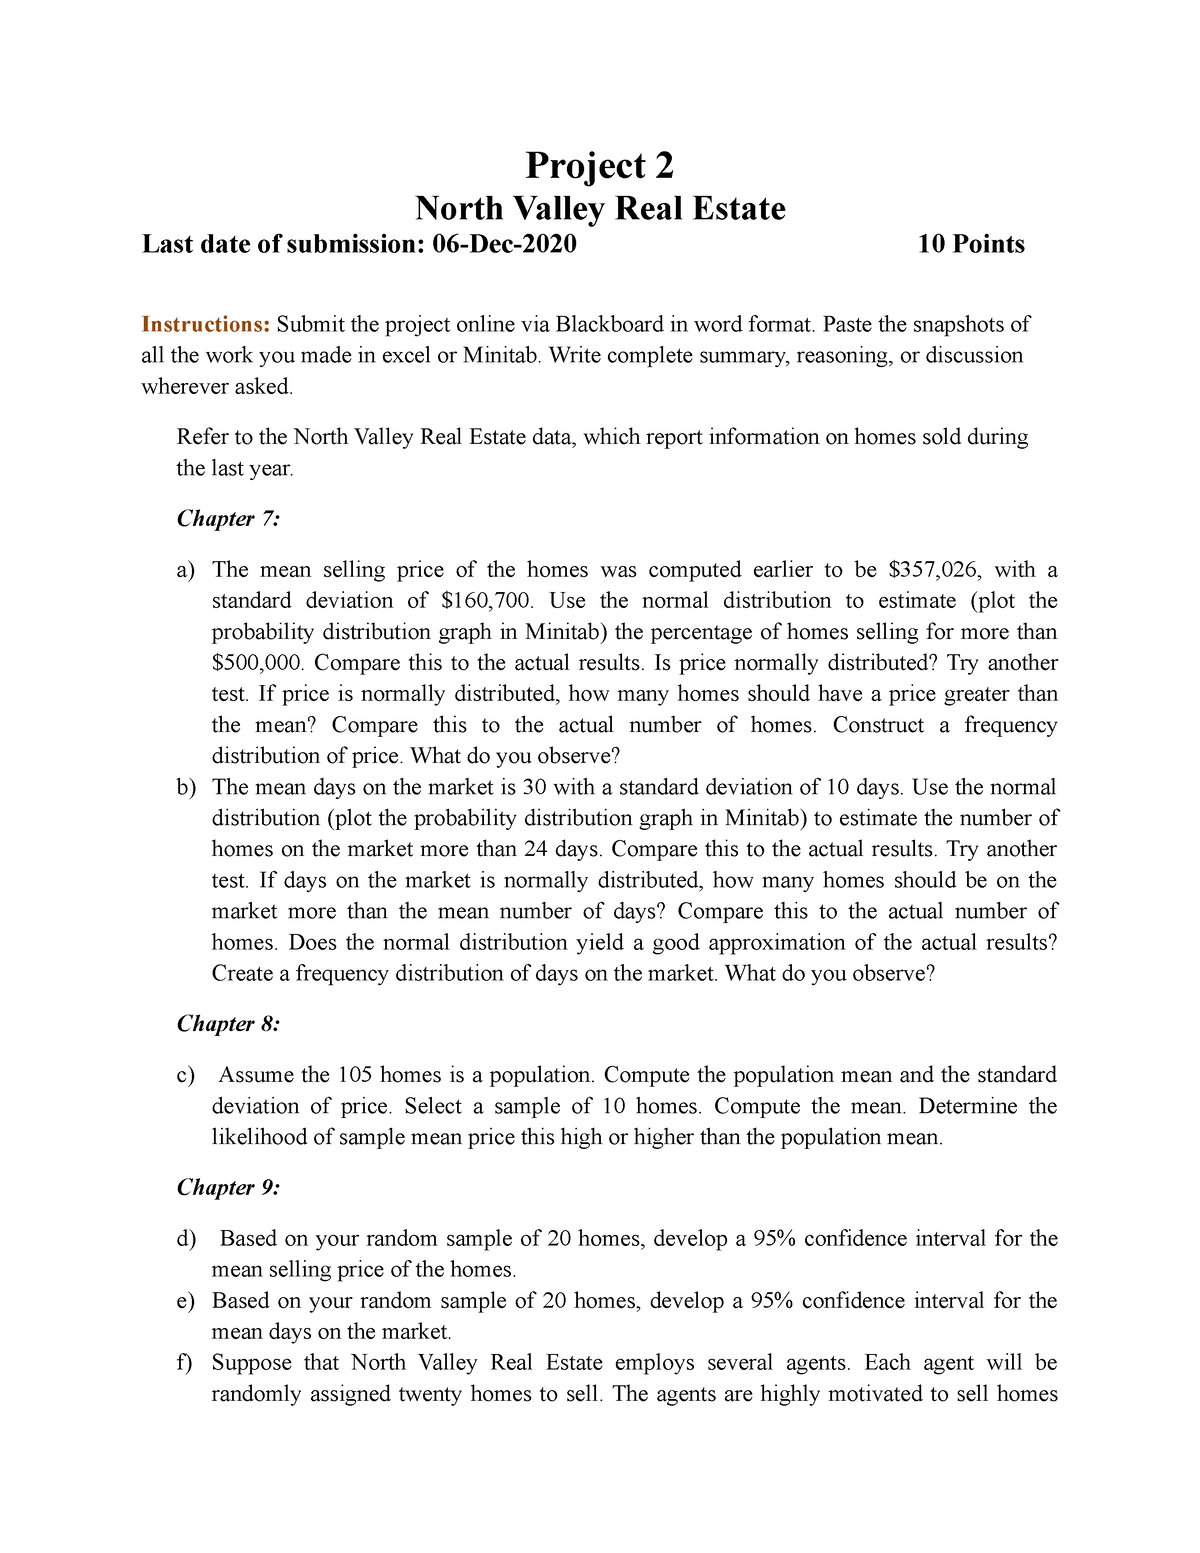 north valley real estate case study part 2